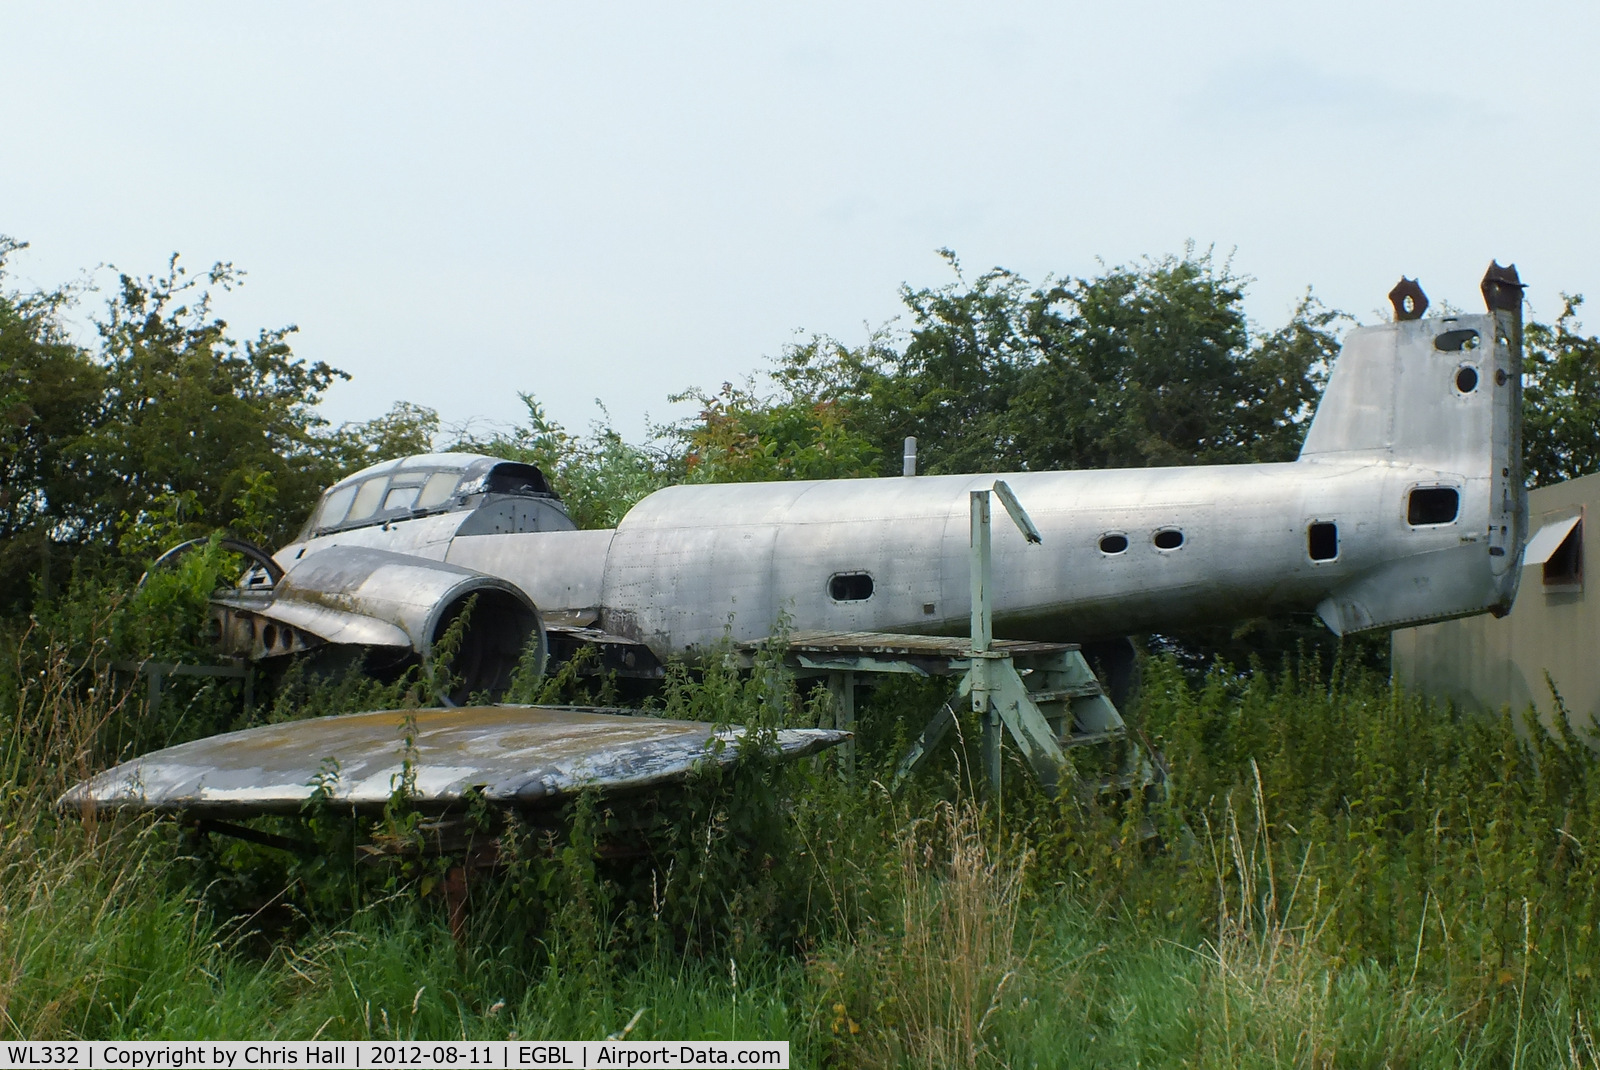 WL332, Gloster Meteor T.7 C/N Not found WL332, at the defunct Jet Aviation Preservation Group, Long Marston